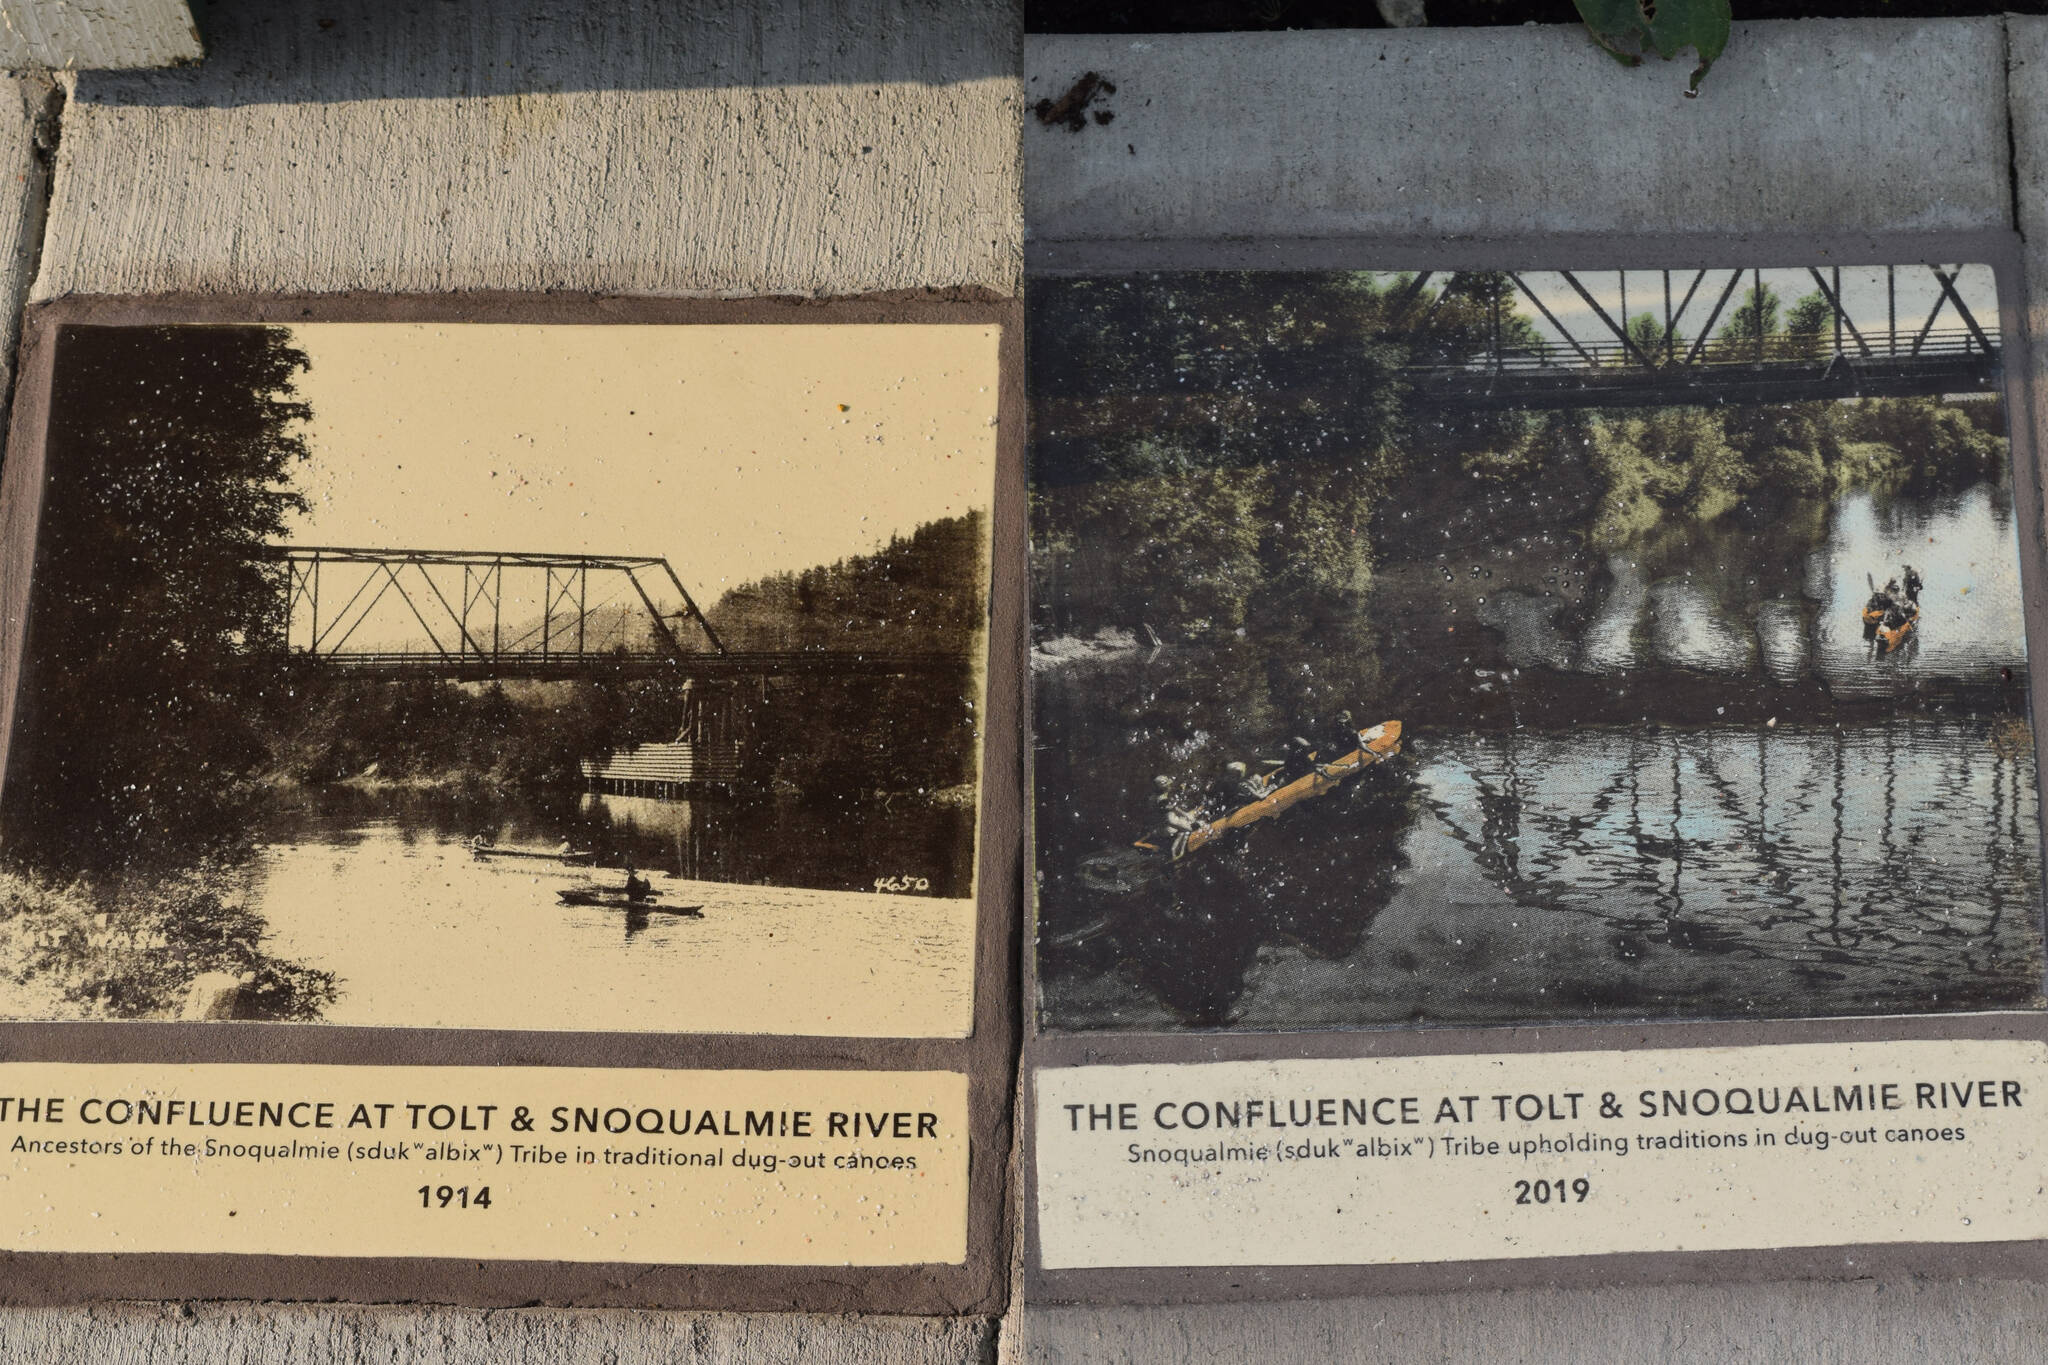 Photos of Snoqualmie Tribal members at the confluence of the Tolt and Snoqualmie Rivers more than a century apart. Photo by Conor Wilson/Valley Record